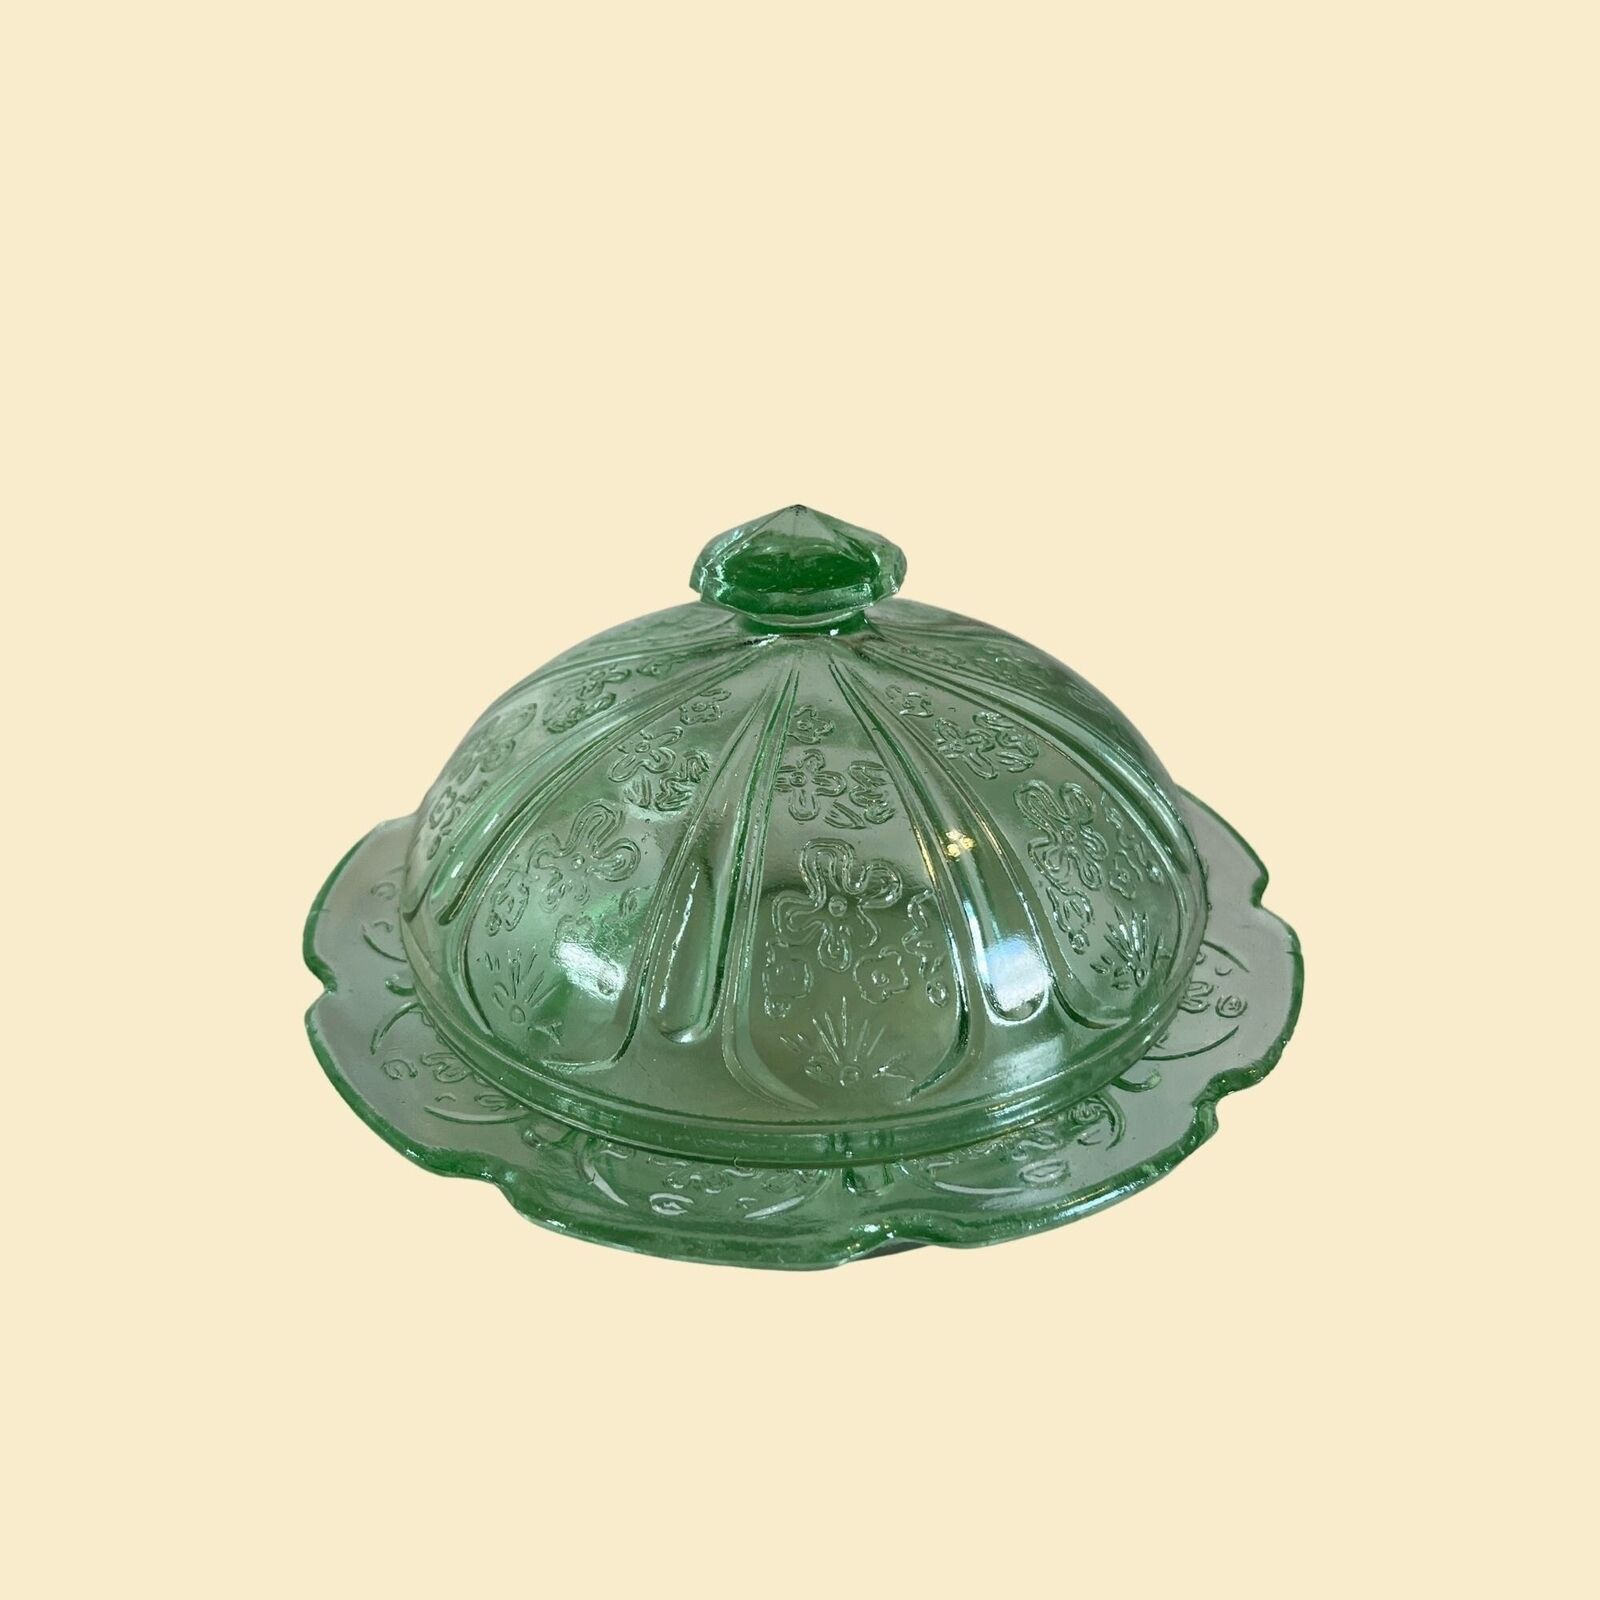 1940s green depression glass candy dish with lid, green dish w/ floral pattern